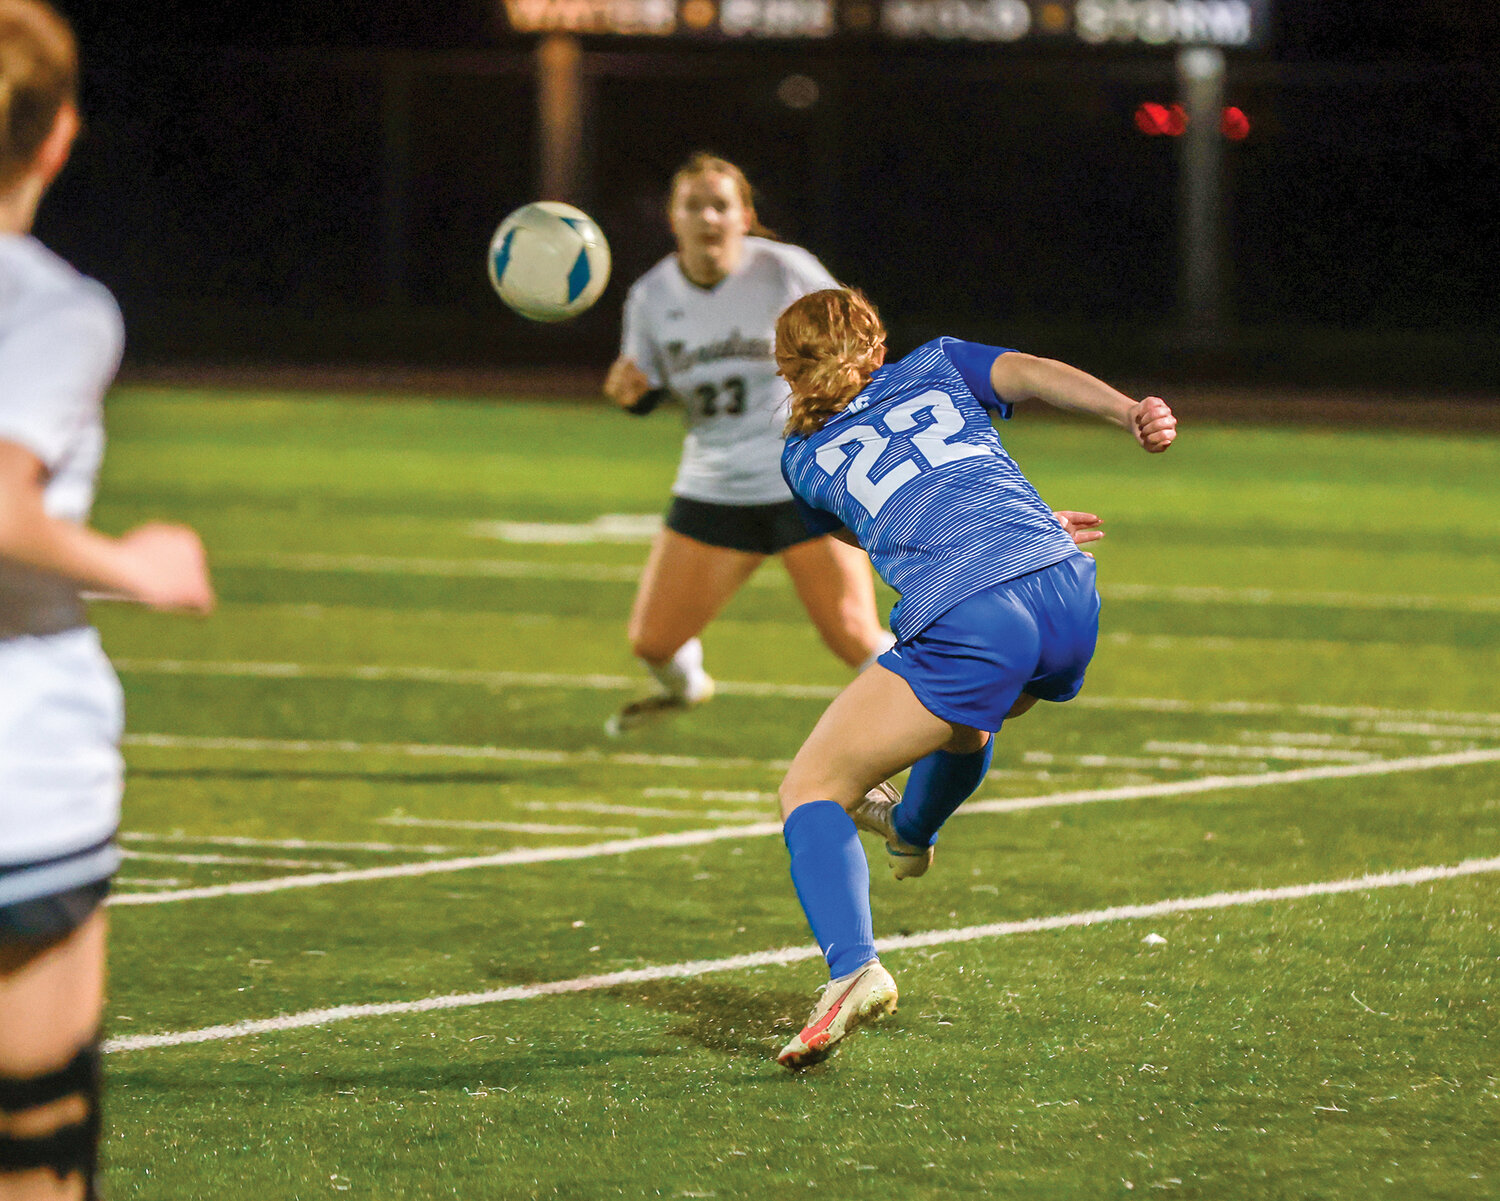 La Center’s Madisen Newbury advances the ball upfield against Meridian High School in the first round of the 1A state playoffs on Wednesday, Nov. 8.